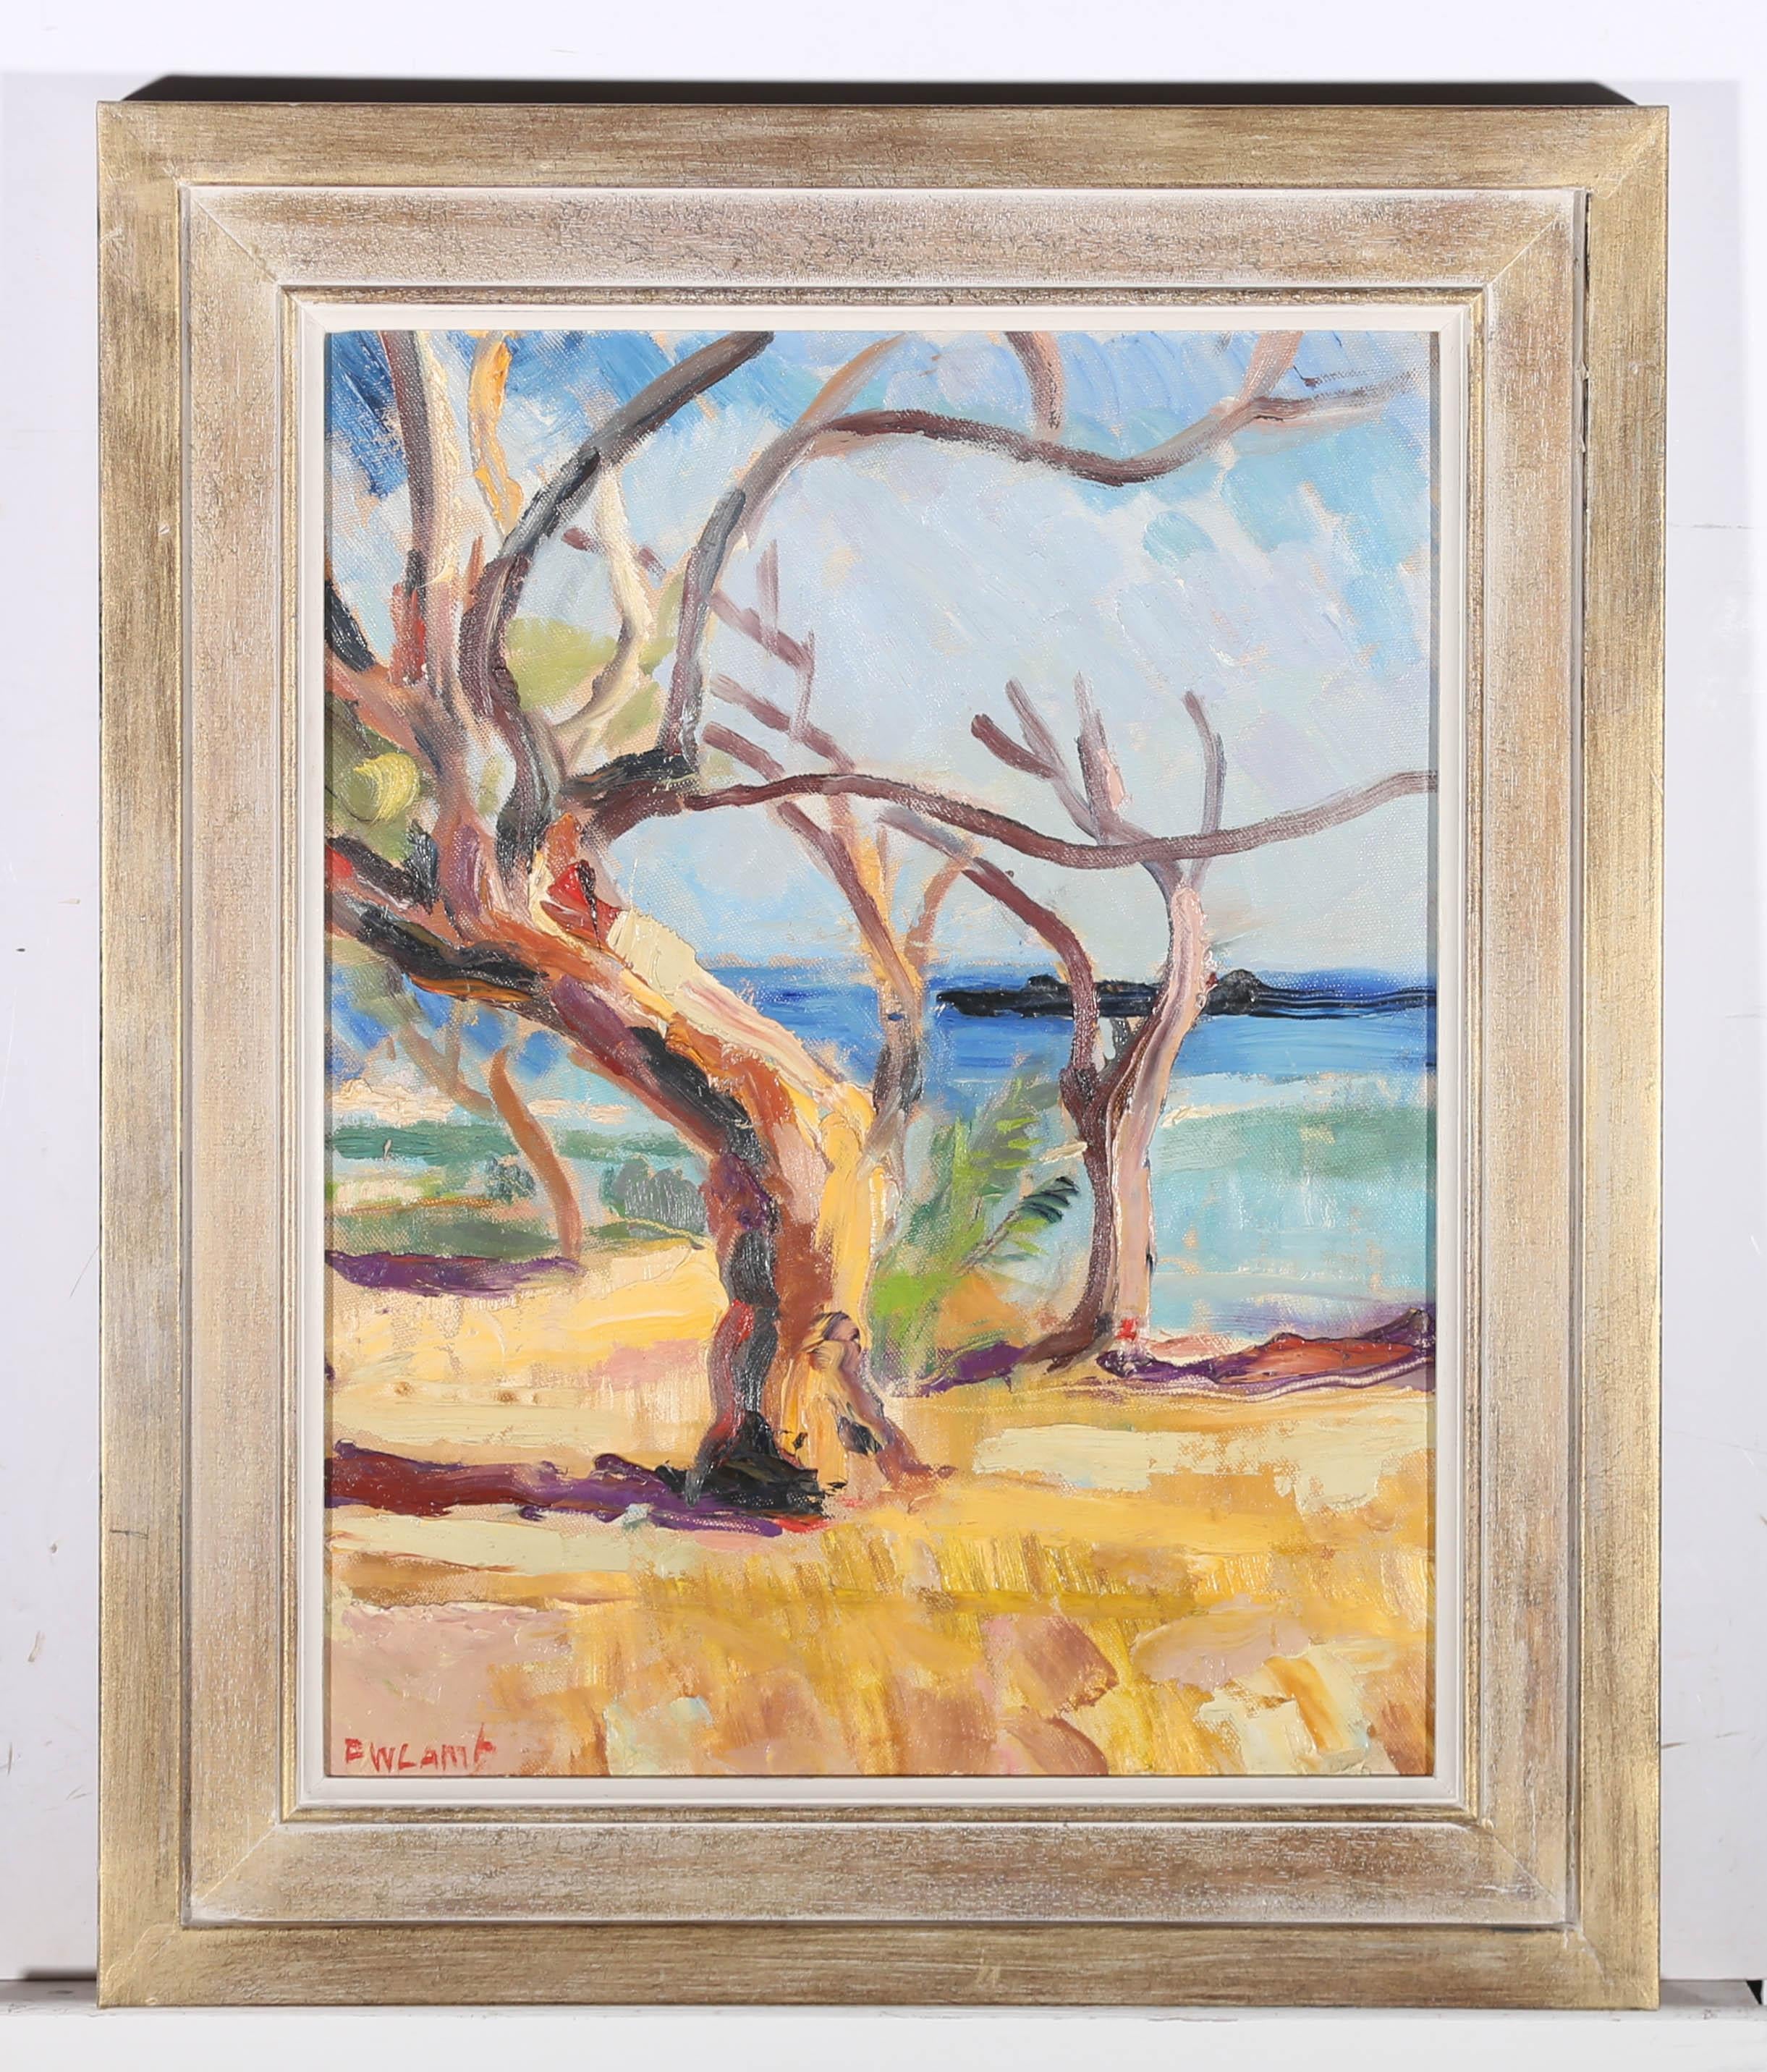 A vibrant and dynamic mid Century oil coastal scene showing gnarled and twisted trees on a vivid shoreline. The trees sprawl out across the canvas like tendrils, their long branches adding movement and flow to the colorful scene. The artist has